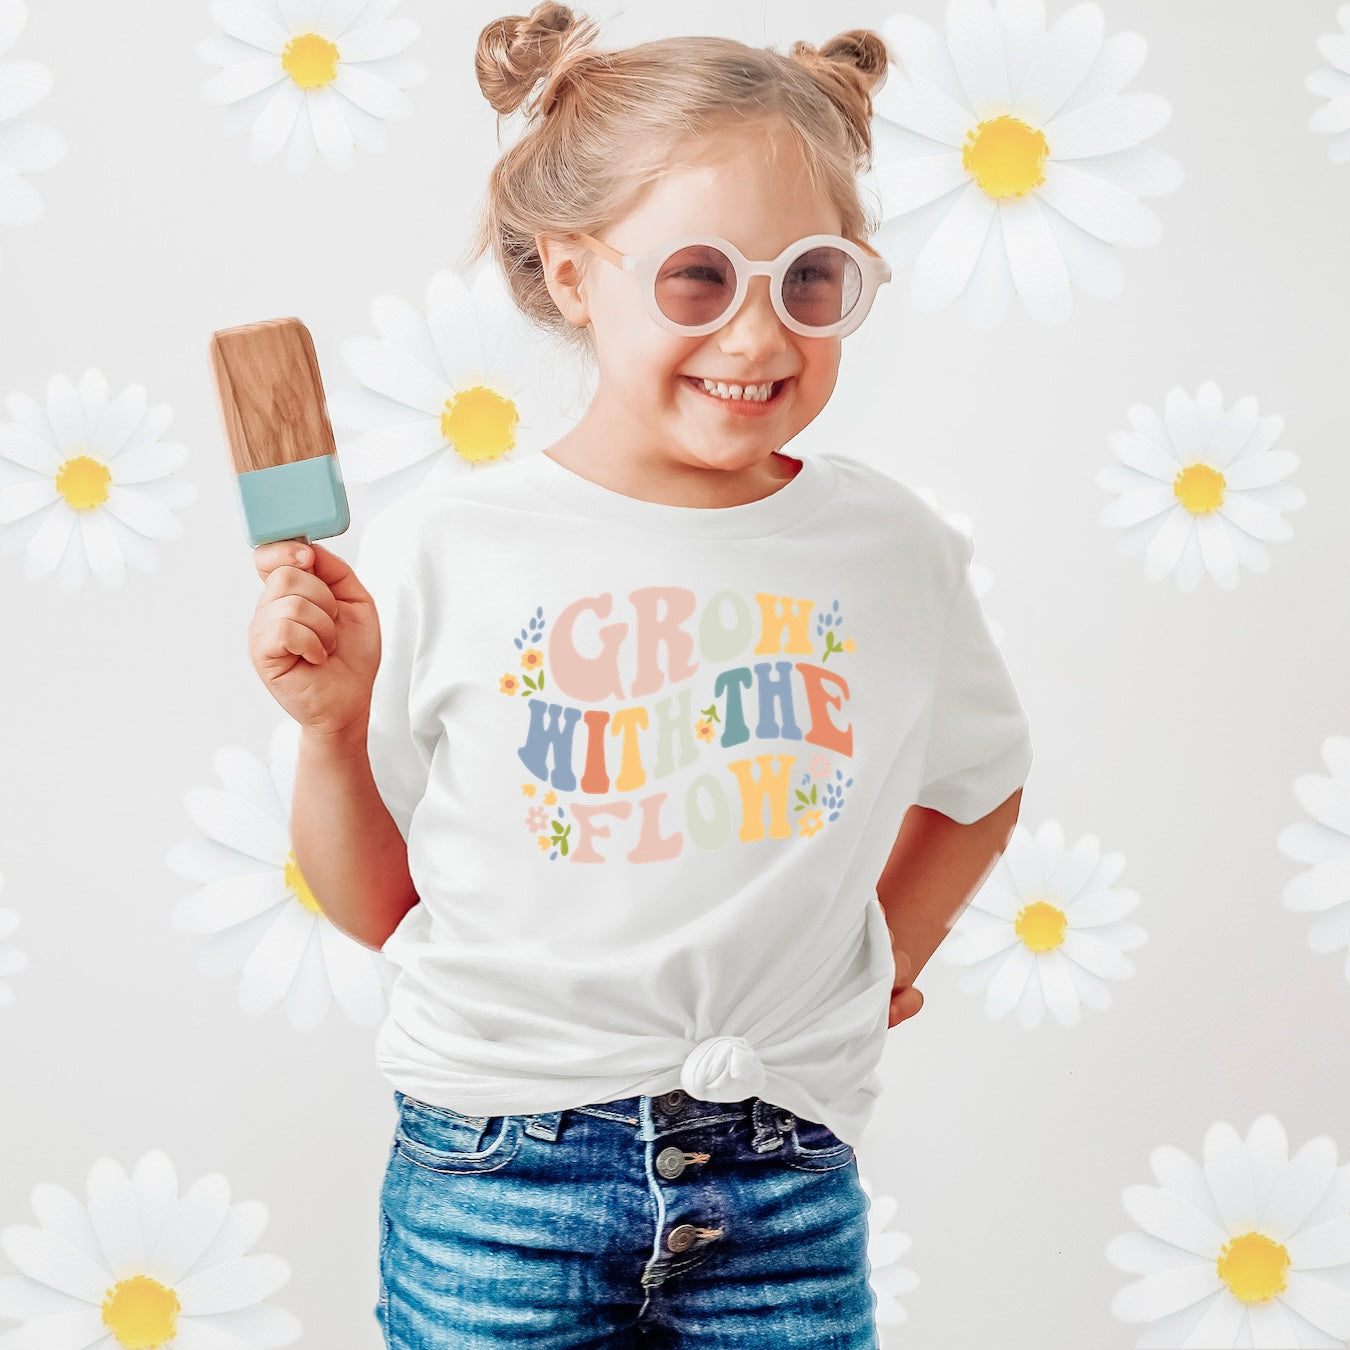 Grow With the Flow Kids Tee